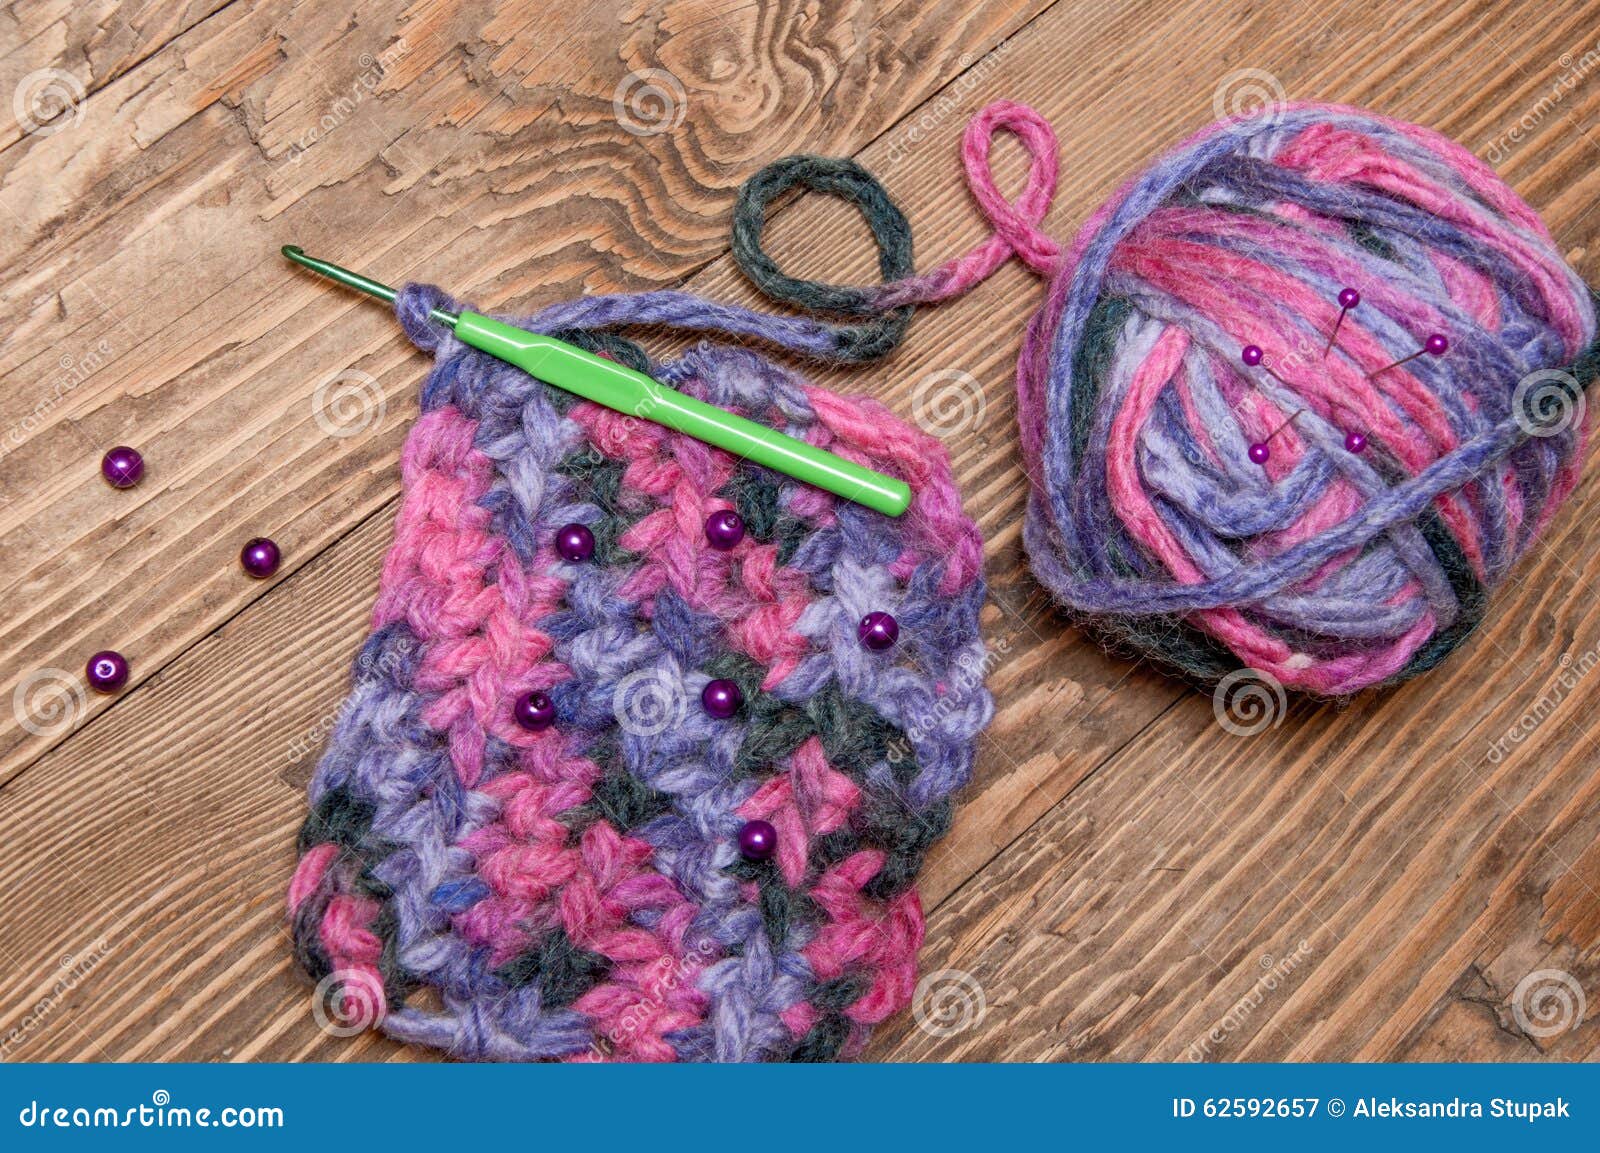 Multicolor Ball of Yarn and Knitting Stock Image - Image of equipment ...